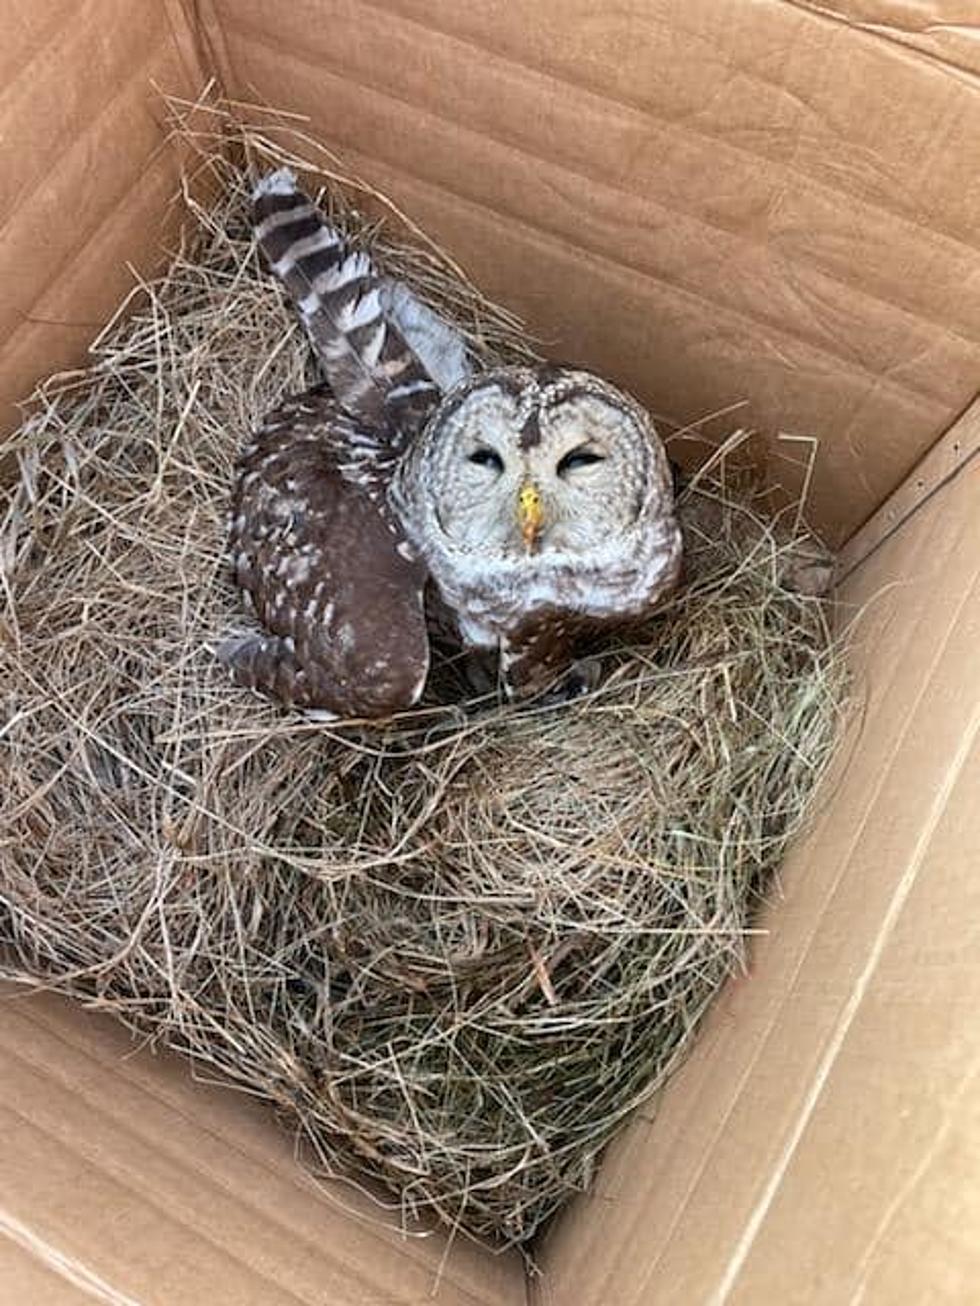 They Gave a Hoot: Montgomery County Sheriffs Save Owl Struck by Car